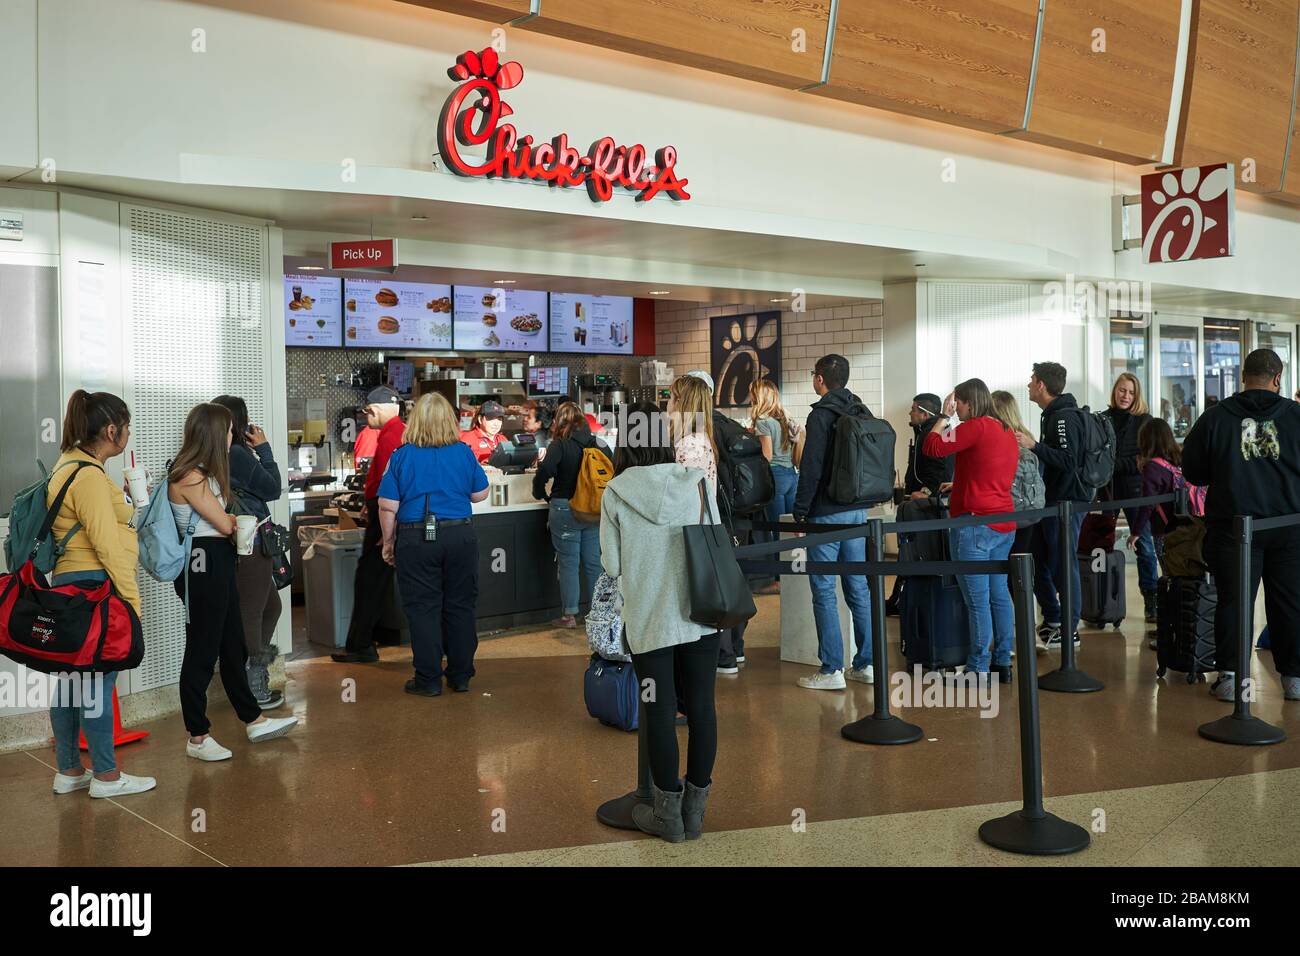 Passengers waiting in line at a Chick-fil-A restaurant in San Jose International Airport, seen on Thursday, Feb 13, 2020. Stock Photo